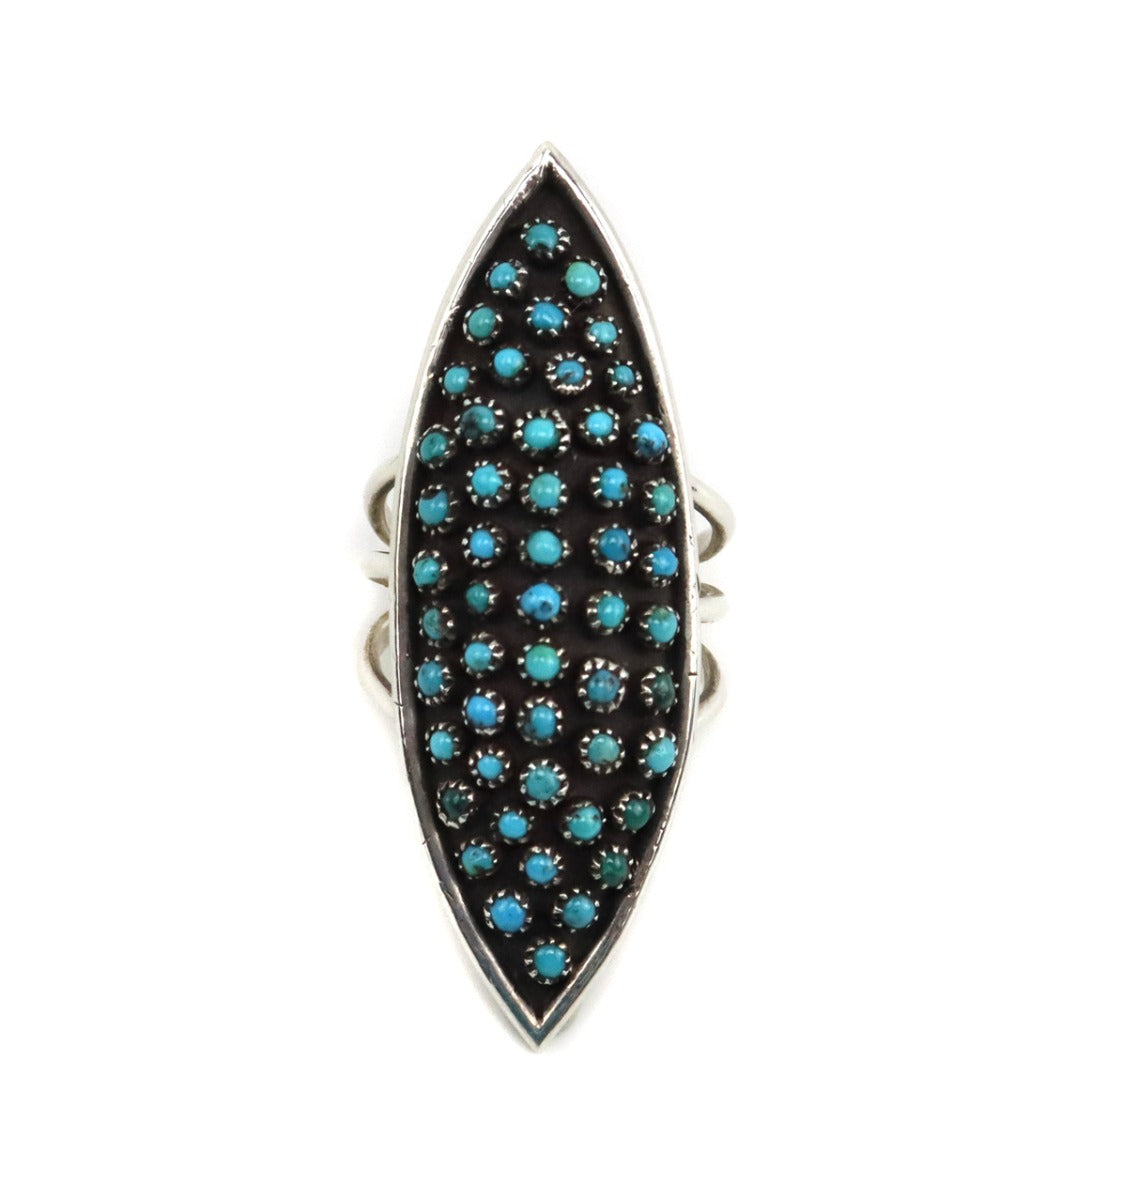 
Zuni Turquoise Petit Point and Silver Ring c. 1950s, size 10 (J15358-CO-028) 